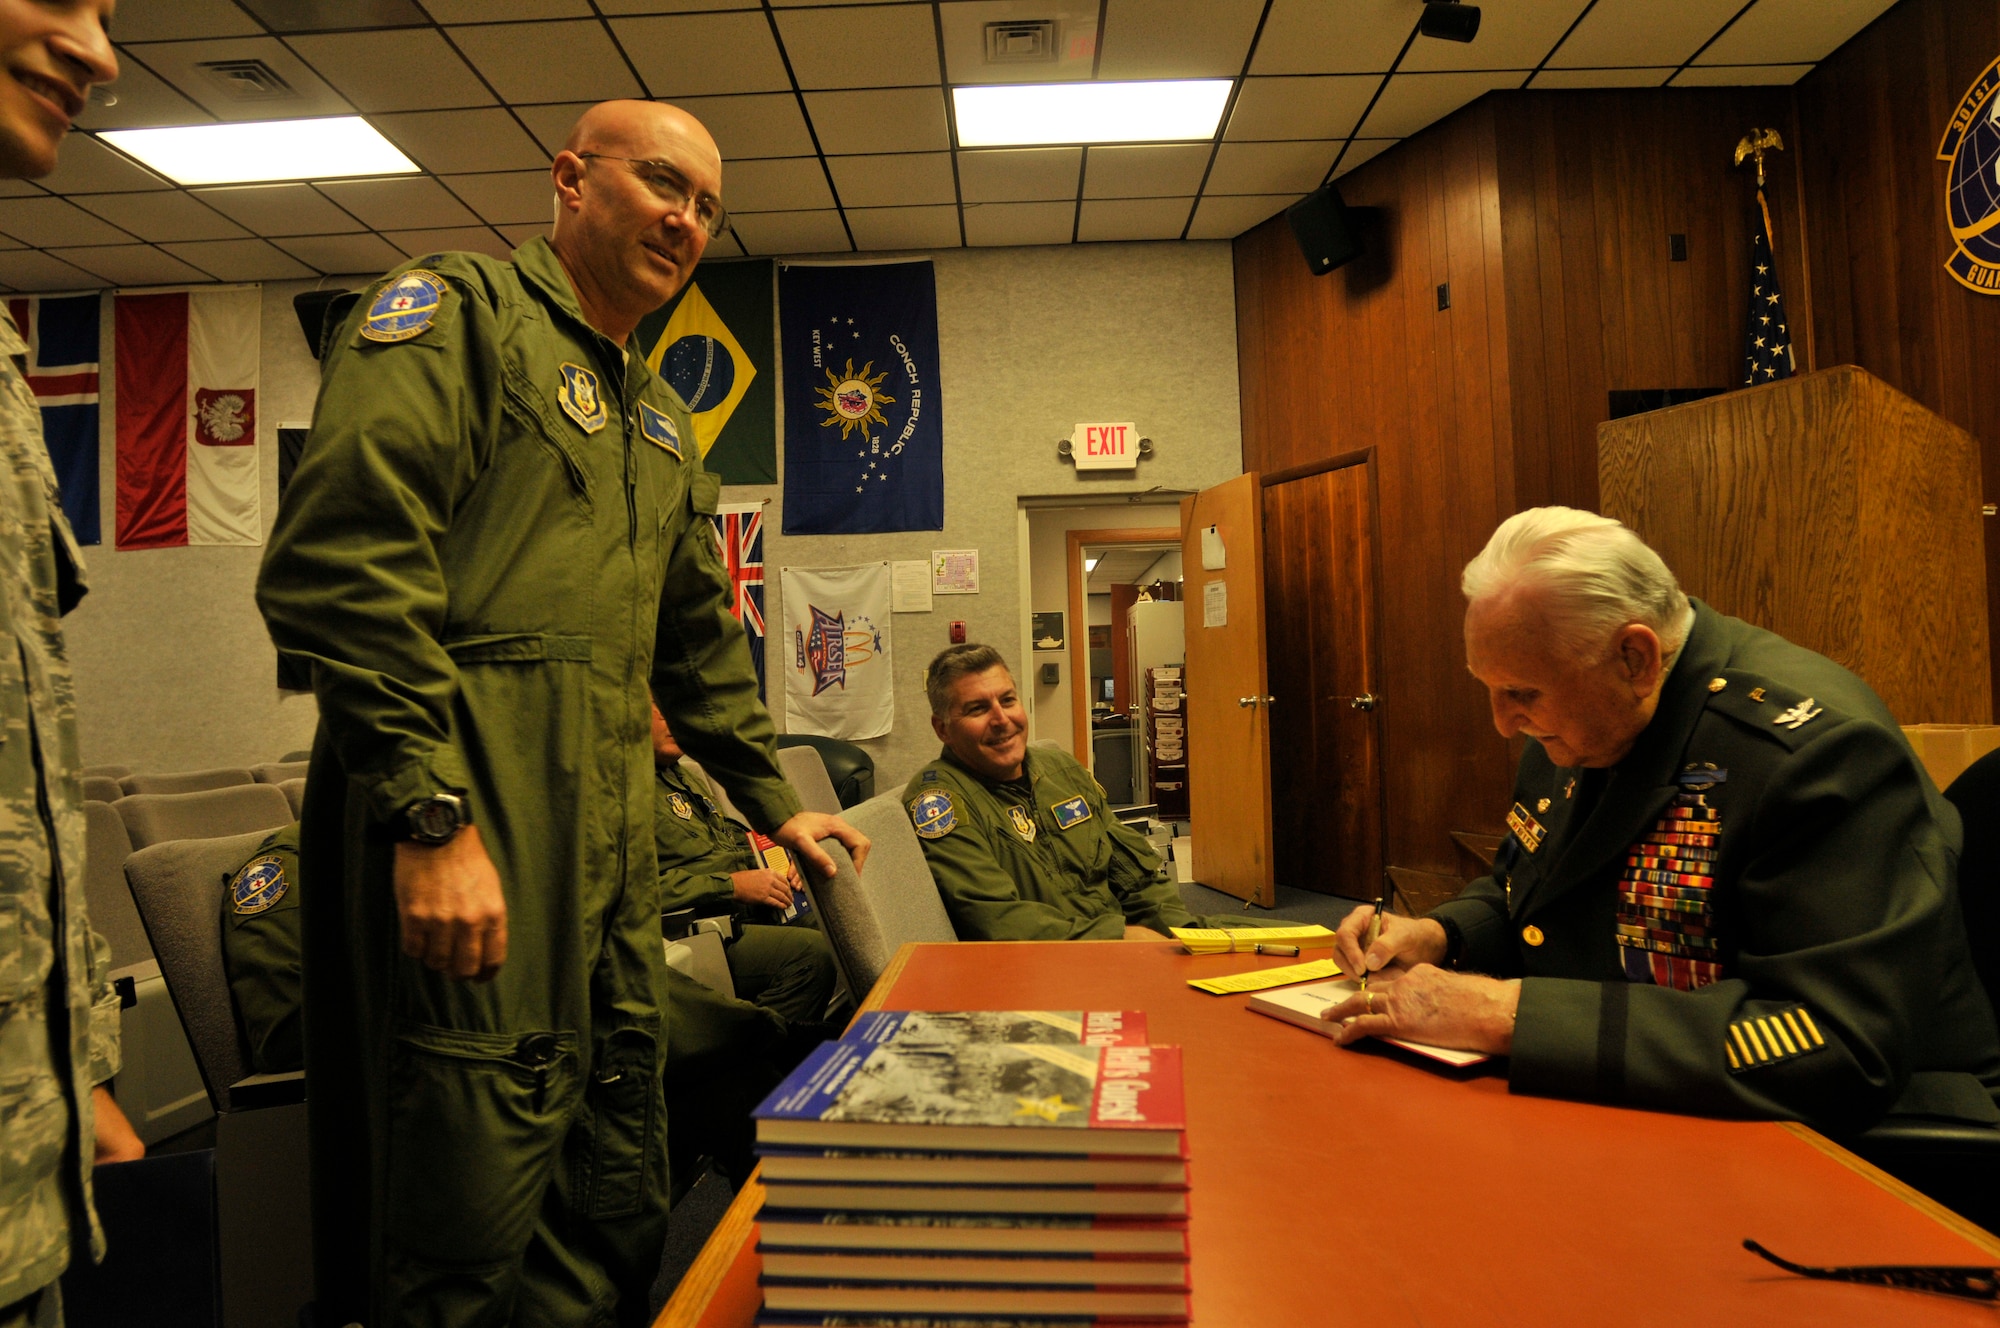 PATRICK AIR FORCE BASE, Fla. ? Colonel Glenn Frazier (Ret.), an American Prisoner of War and Bataan Death March survivor from April 9, 1942 to Sept. 4, 1945, signs a book for Lt. Col. Tim Davis, a rescue reserve helicopter pilot with the 920th Rescue Wing. Colonel Frazier spent one-on-one time with the helicopter pilots and crew before speaking to the wing during the drill weekend, November 6, 2010.  The Bataan Death March was a forced, brutal march of about 80,000 American and Filipino prisoners at the beginning of WWII. Out of the 80,000 prisoners only about 54,000 made it to the final camp, Camp O?Donnell.  (U.S. Air Force photo/Staff Sgt. Leslie Kraushaar)